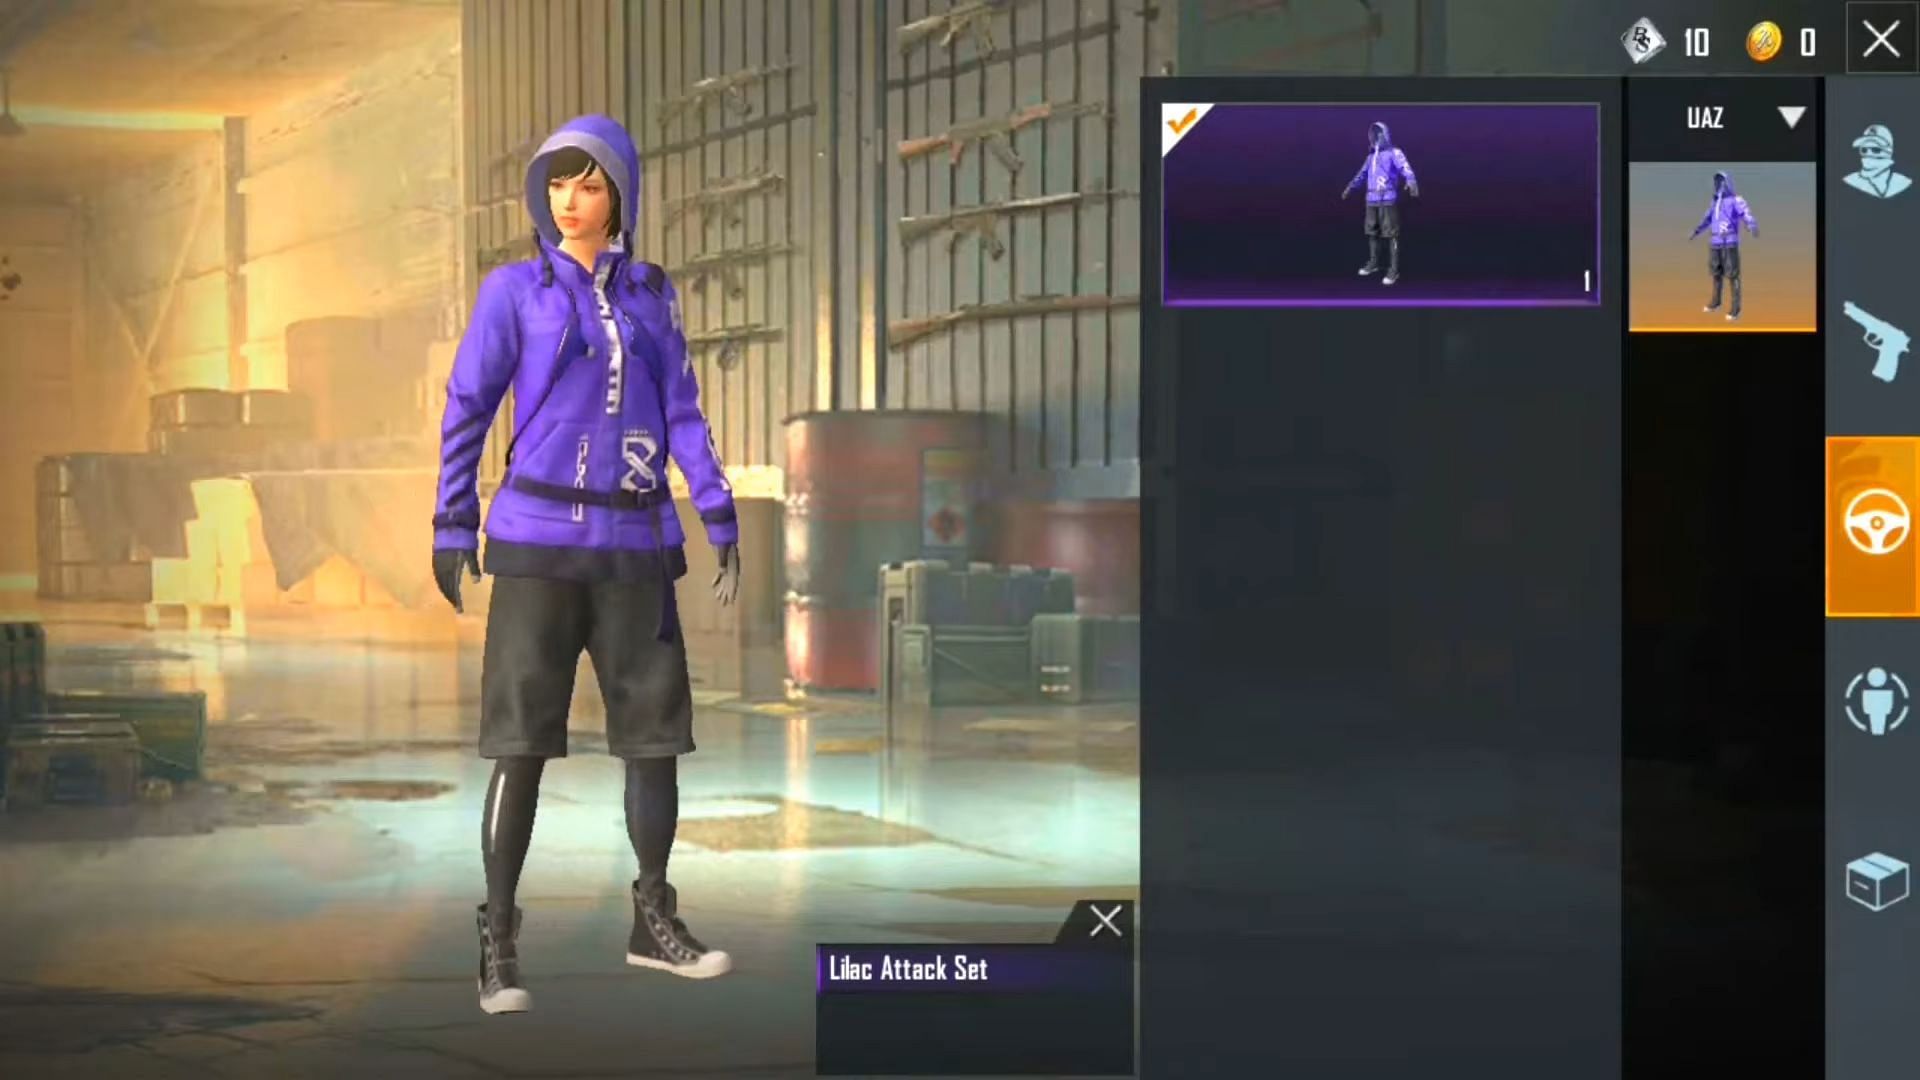 Lilac Attack Set (Image via Great Army YT / YouTube)